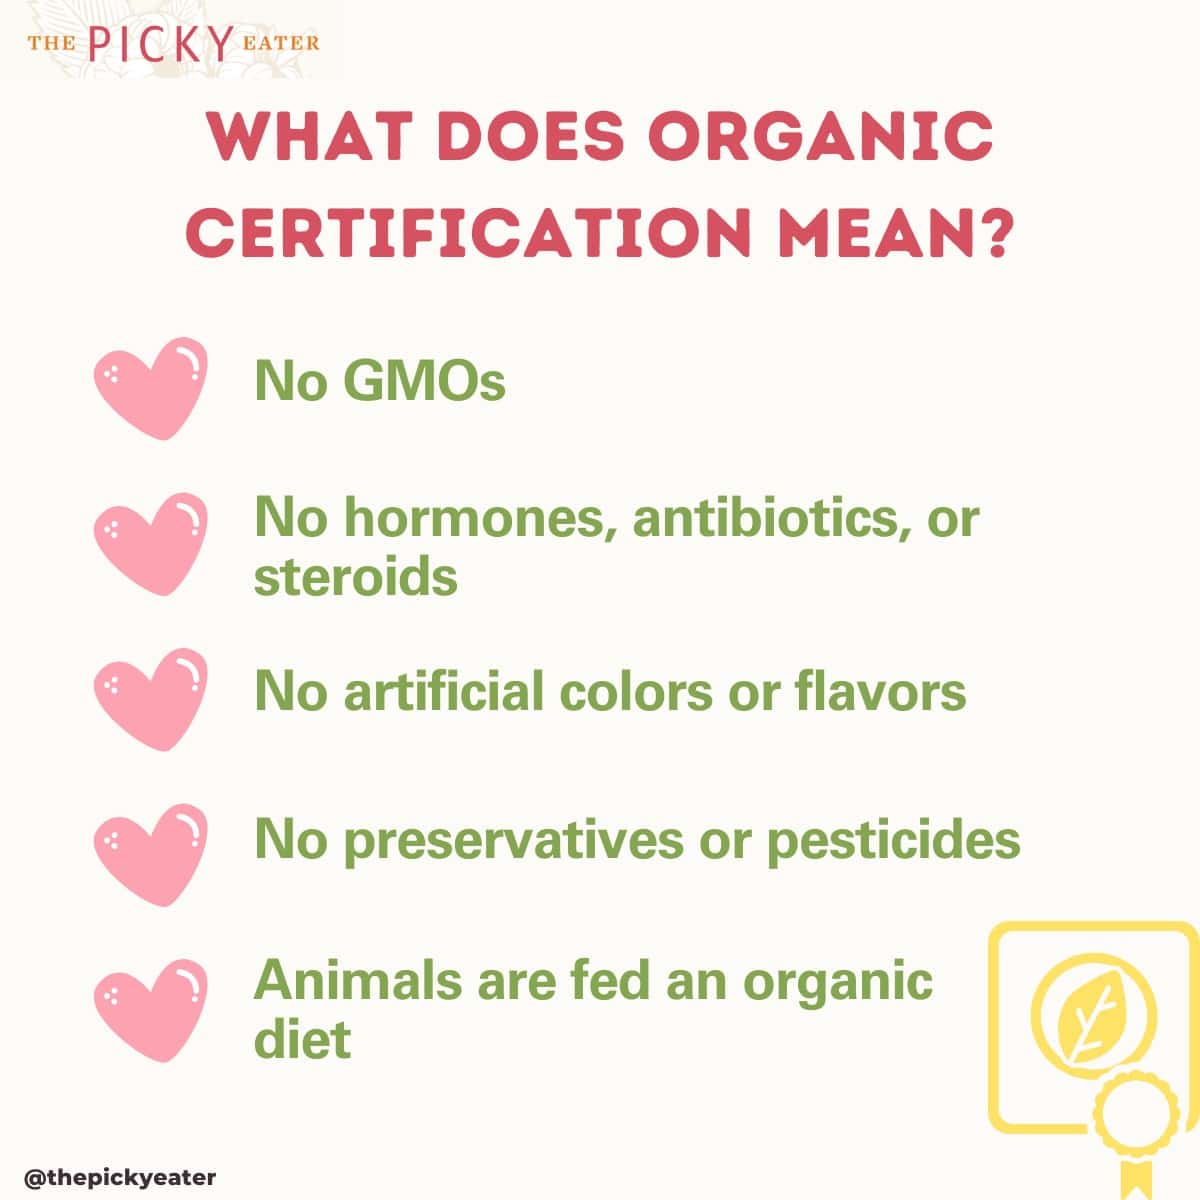 Graphic describing what organic certification means.